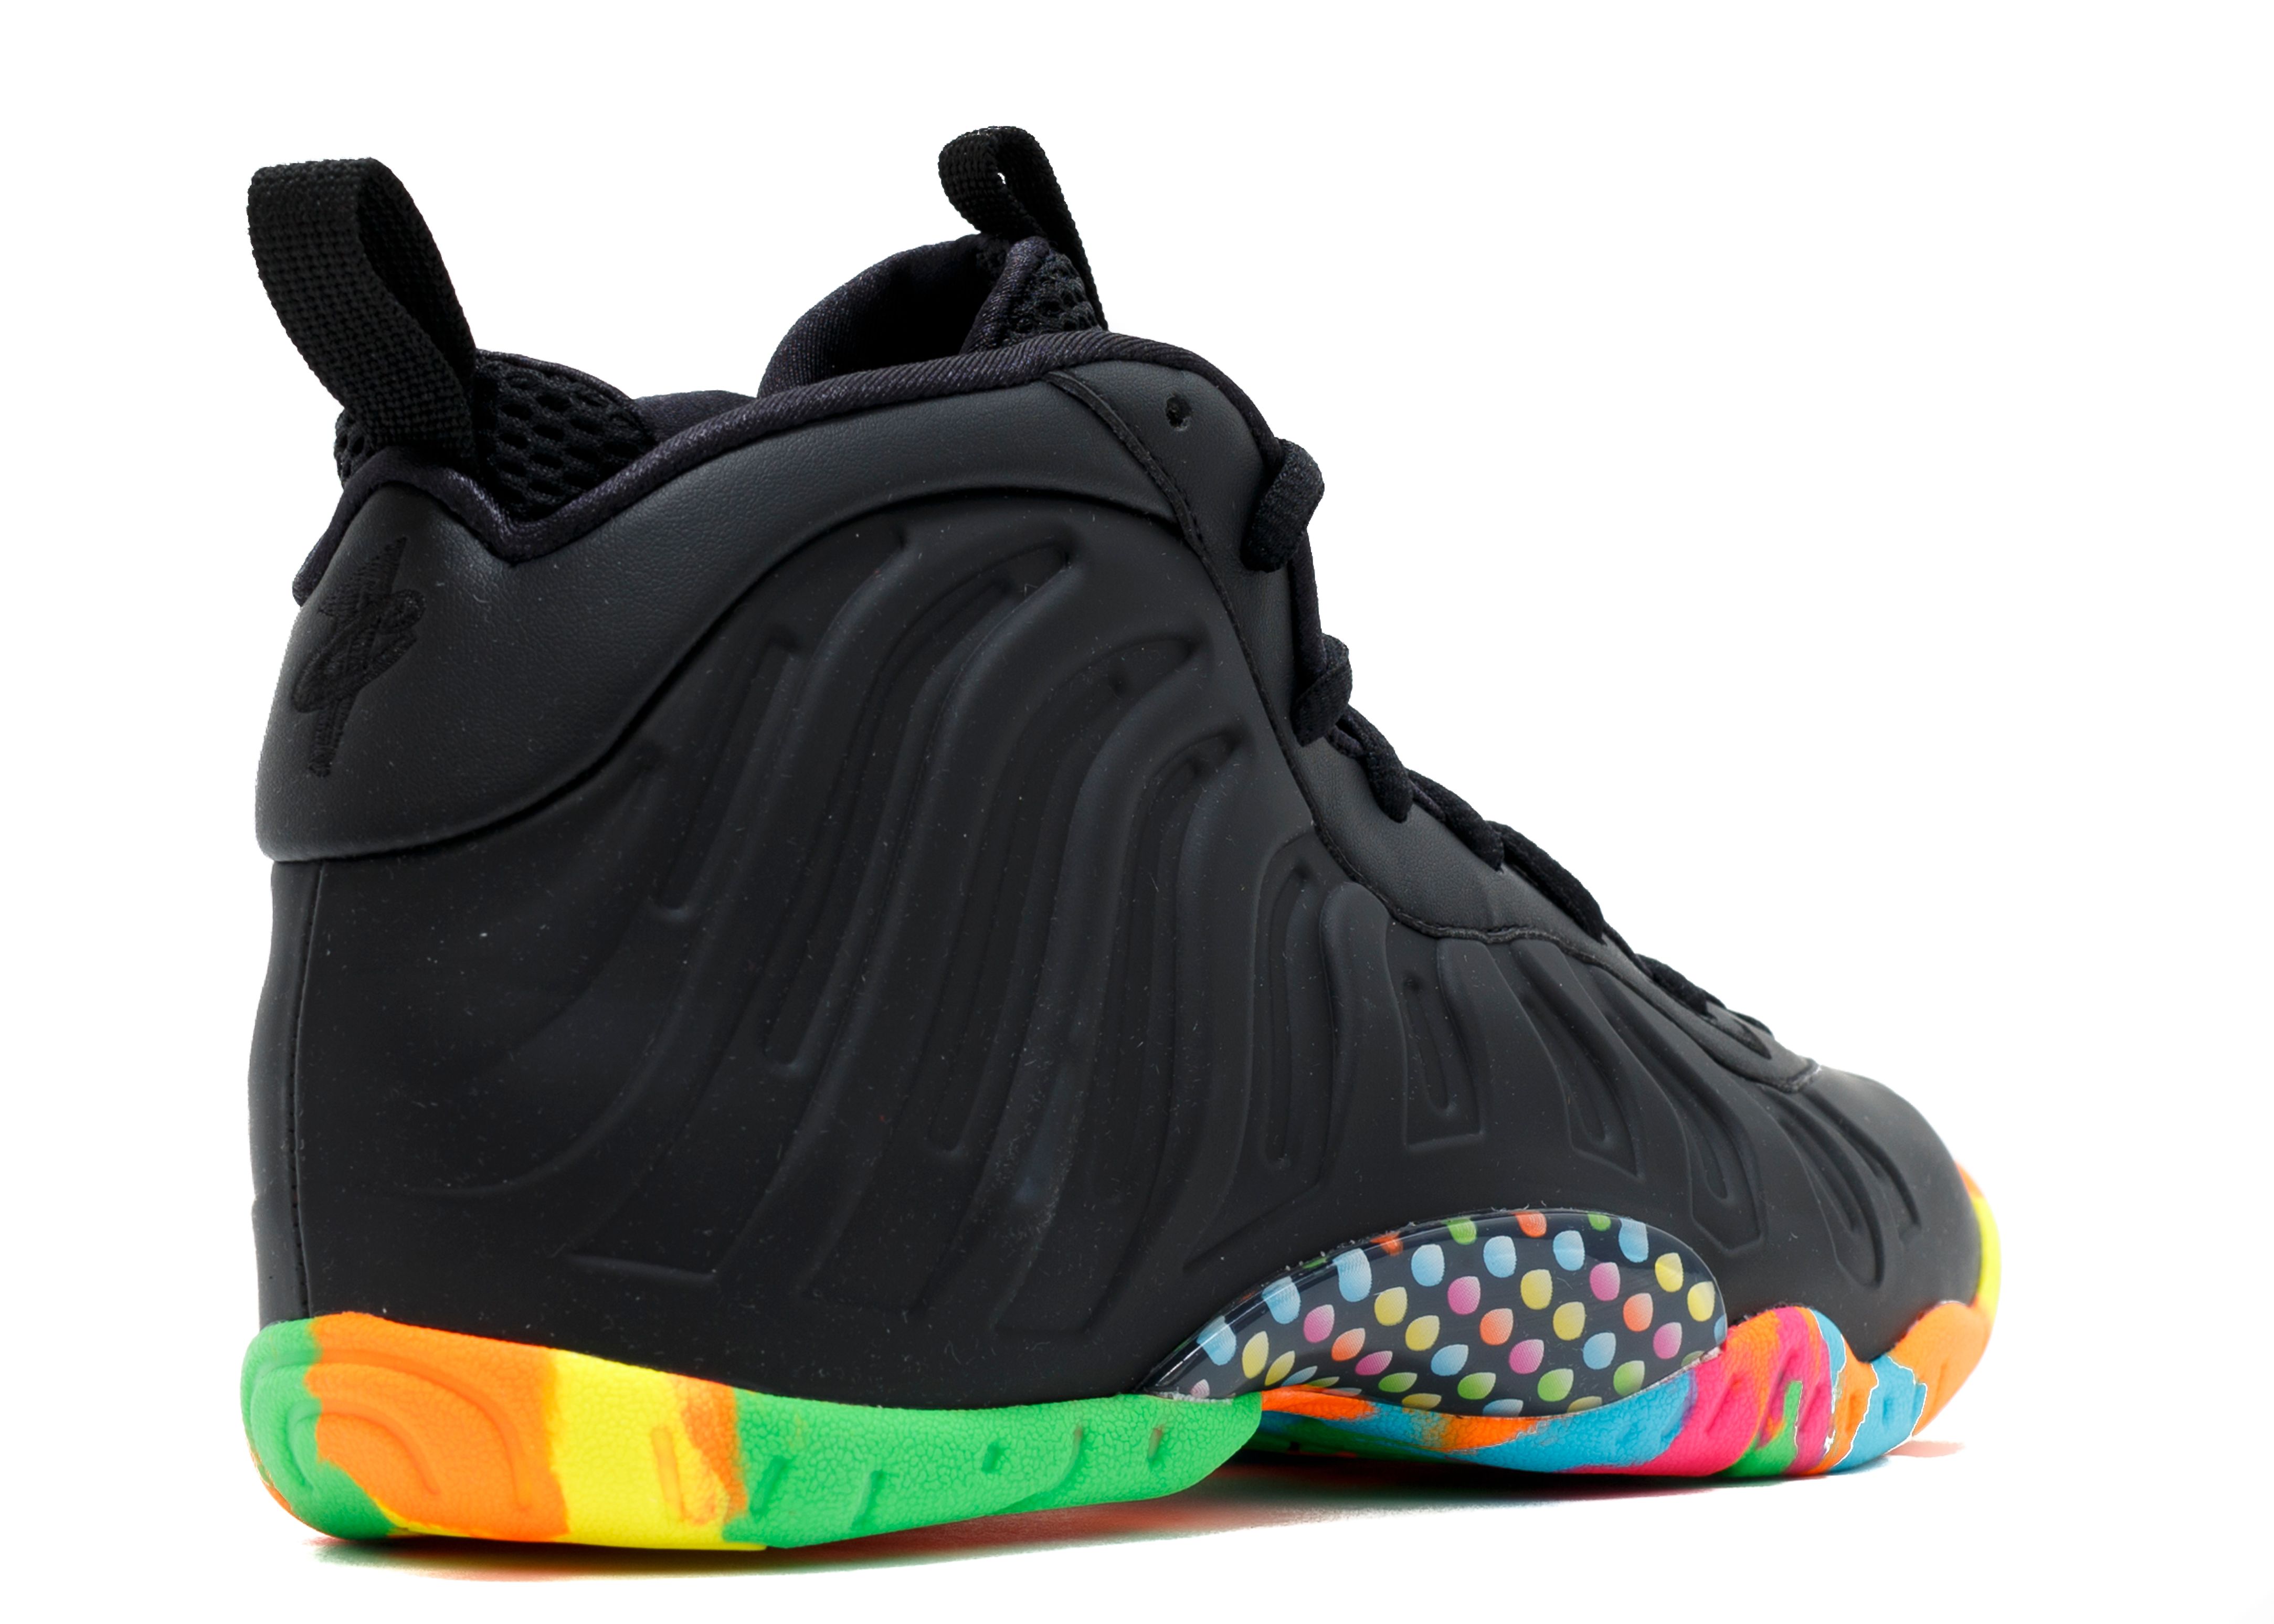 air foamposite one white fruity pebbles